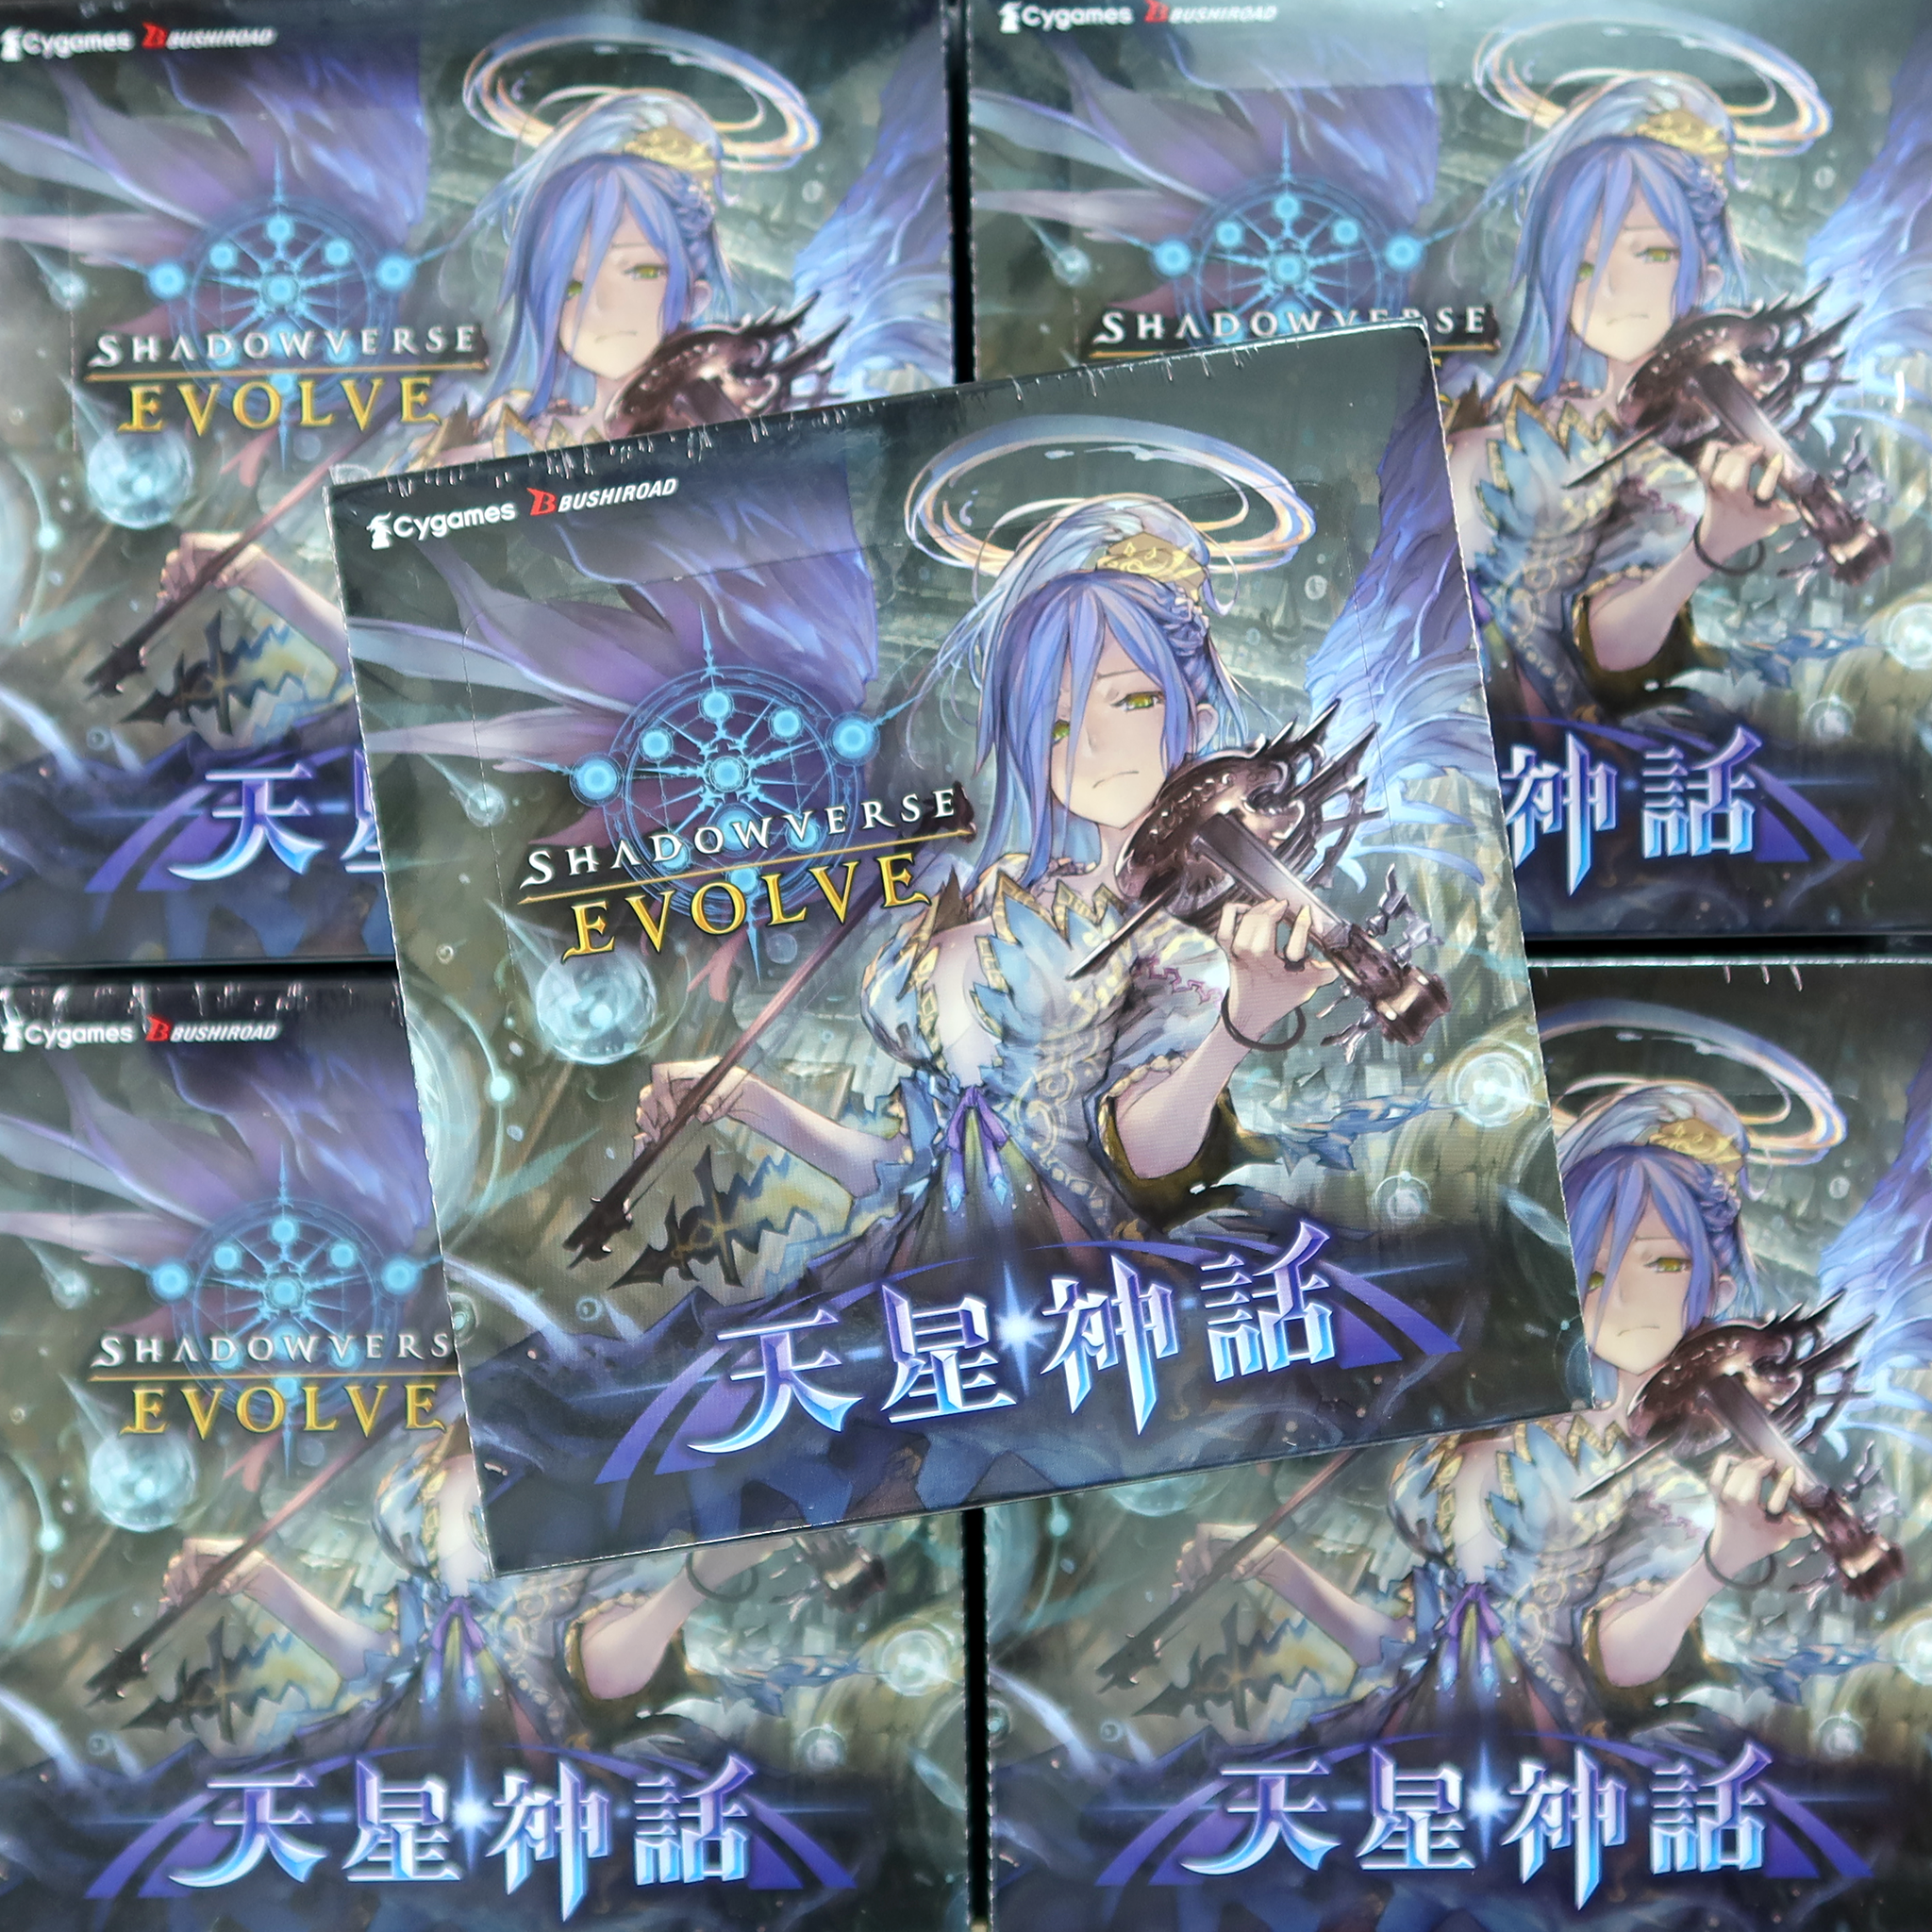 NijisanjiEN collab for Booster Set #3: Flame of Laevateinn for